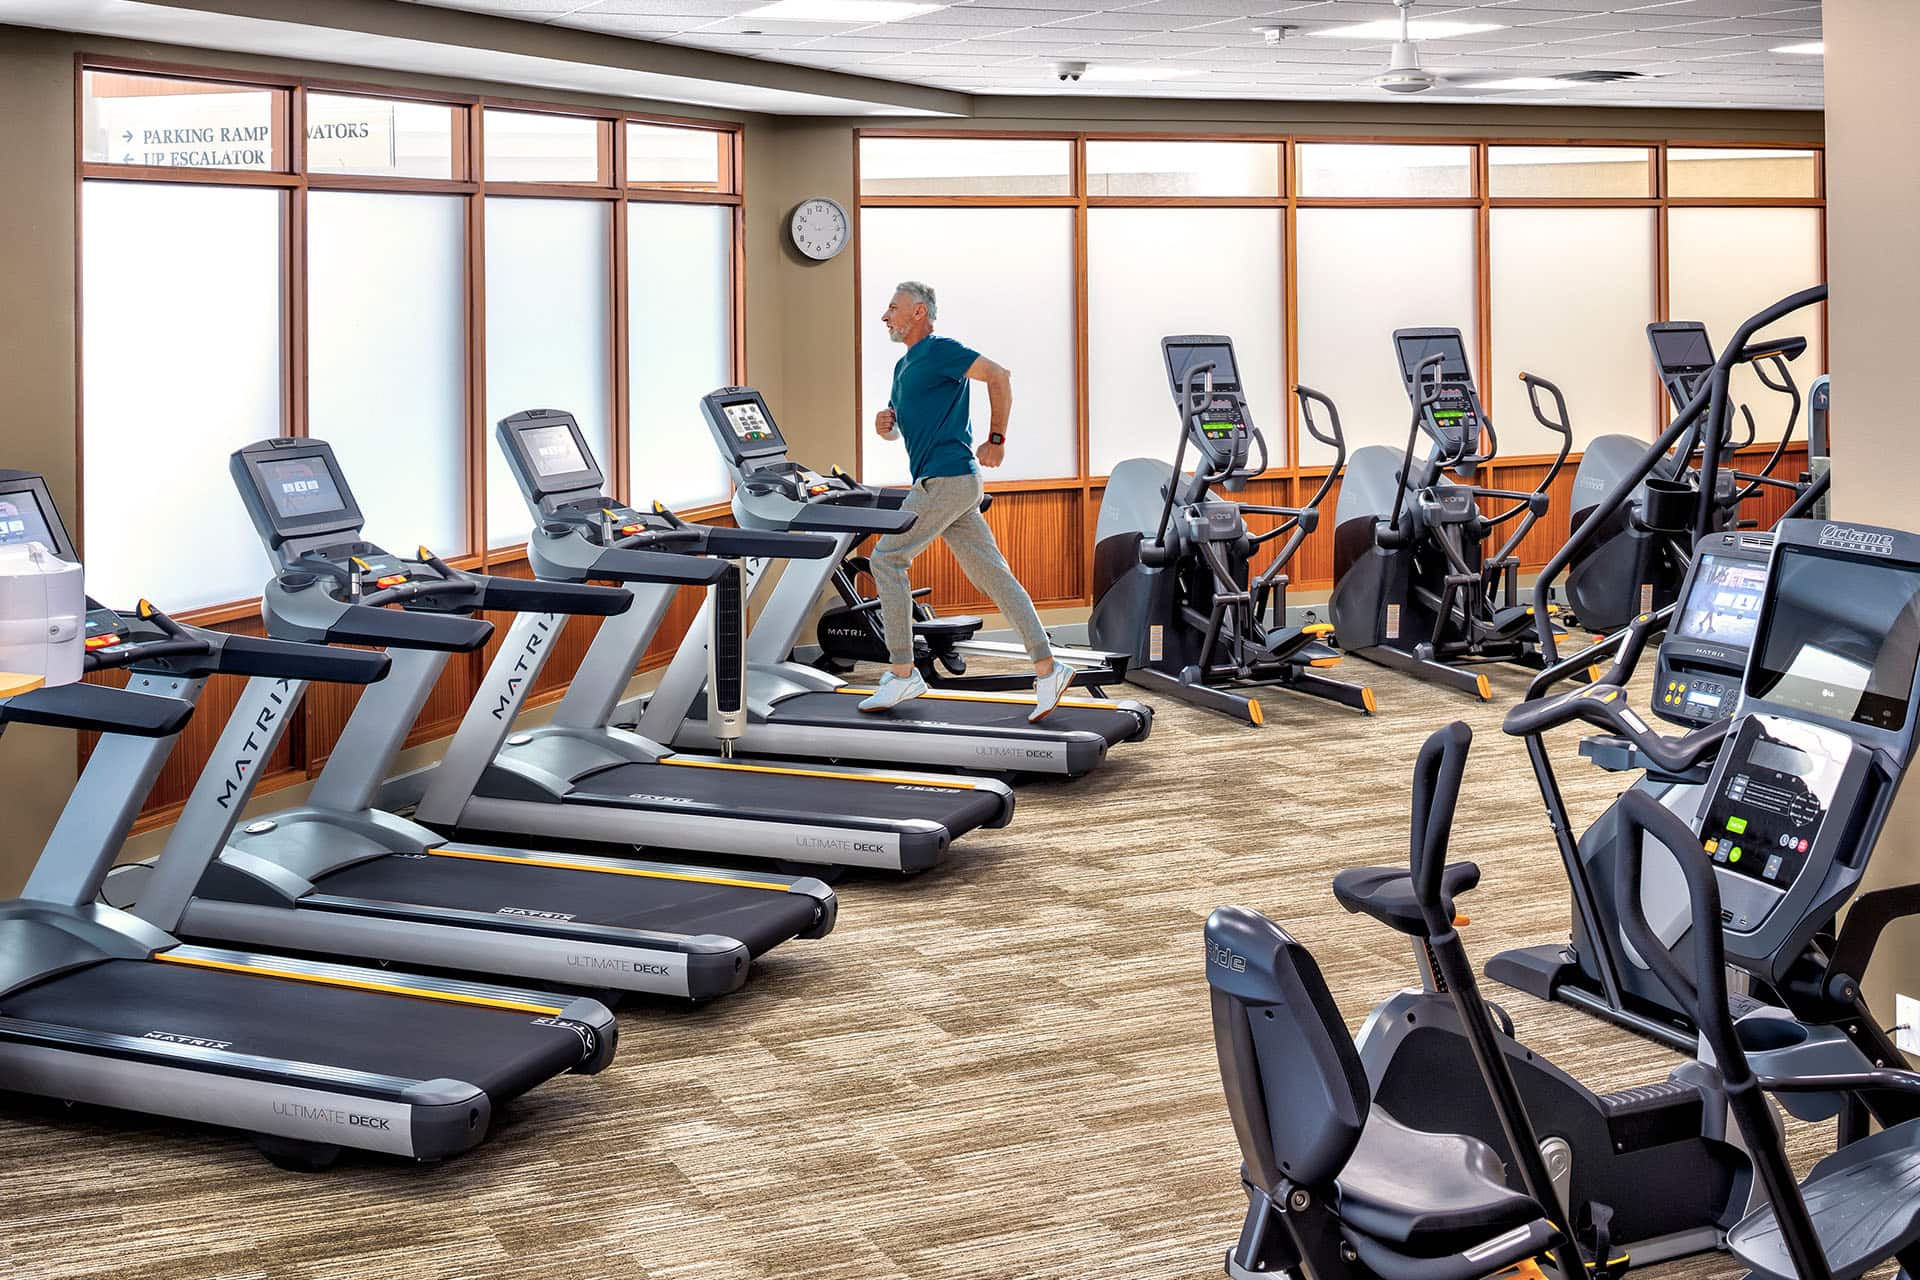 Fitness Center Treadmills and exercise equipment